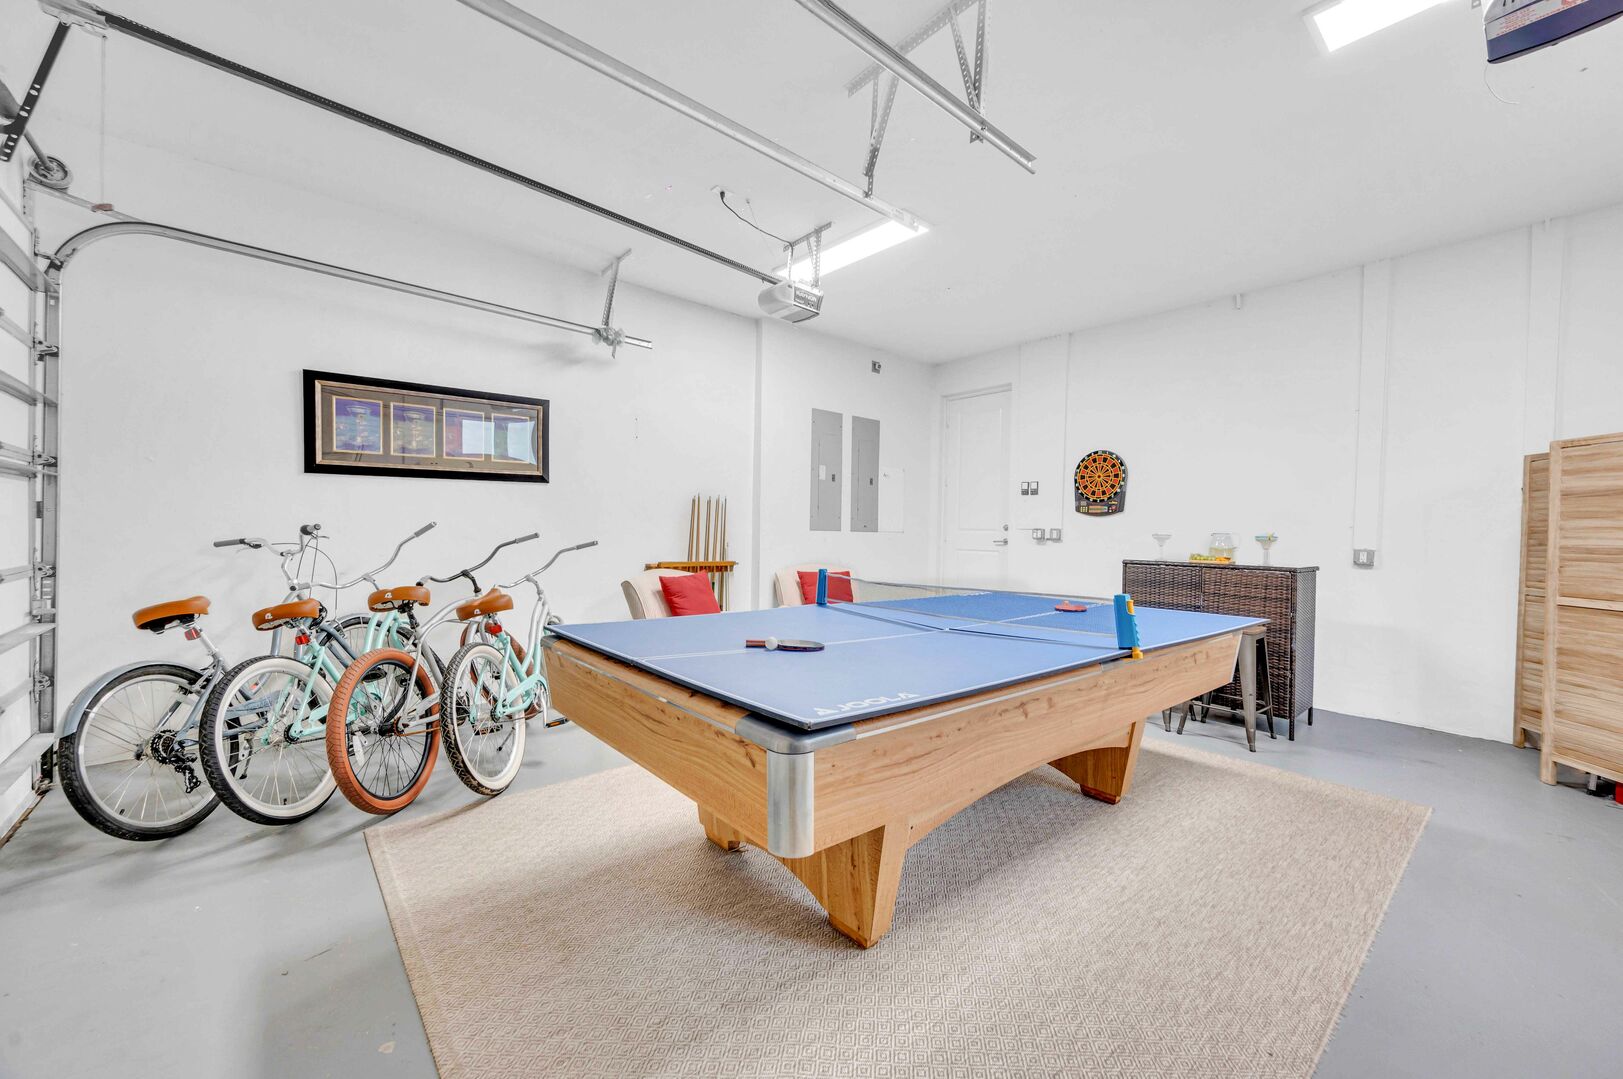 This game room has plenty of seating and includes both a Ping-Pong table and a pool table.